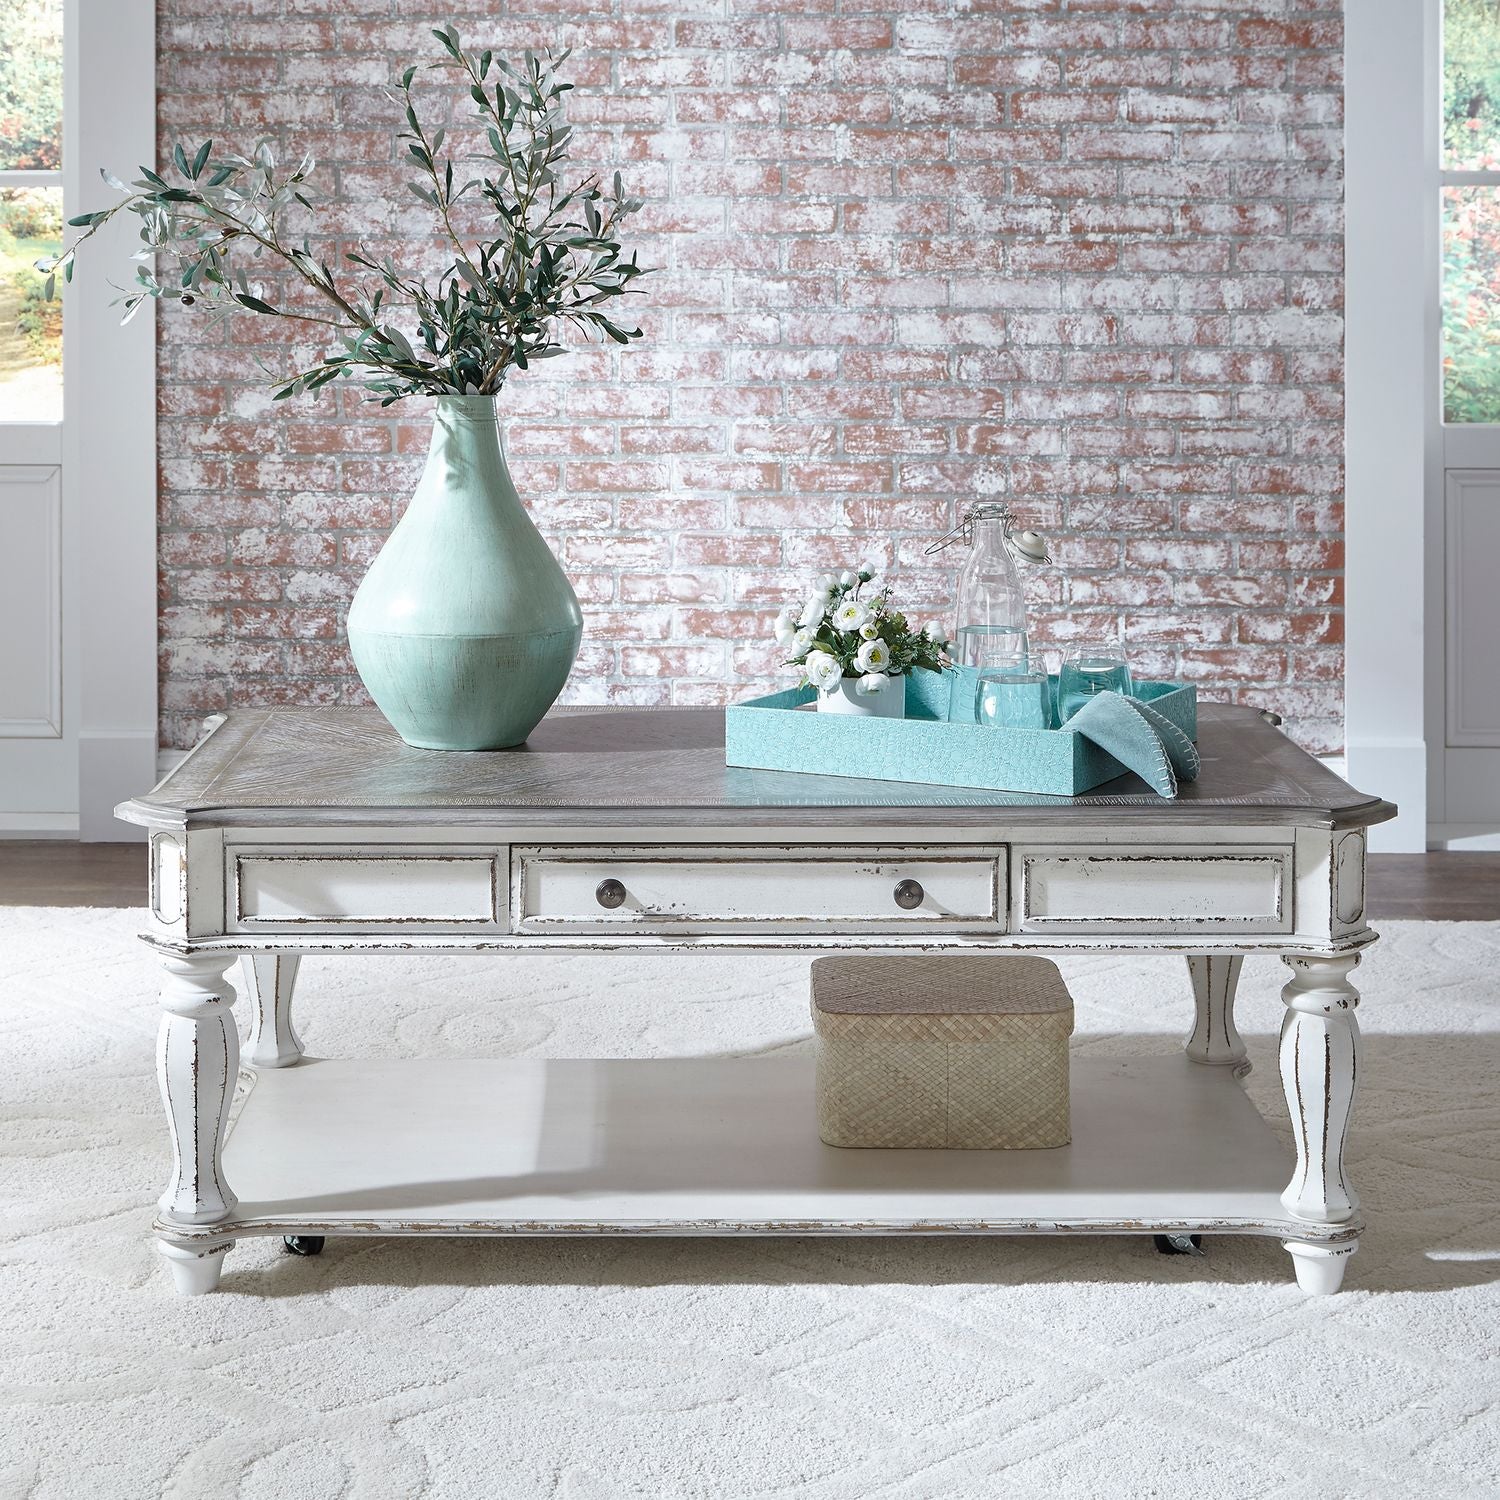 Rectangular Magnolia Manor Cocktail Table by Liberty Furniture